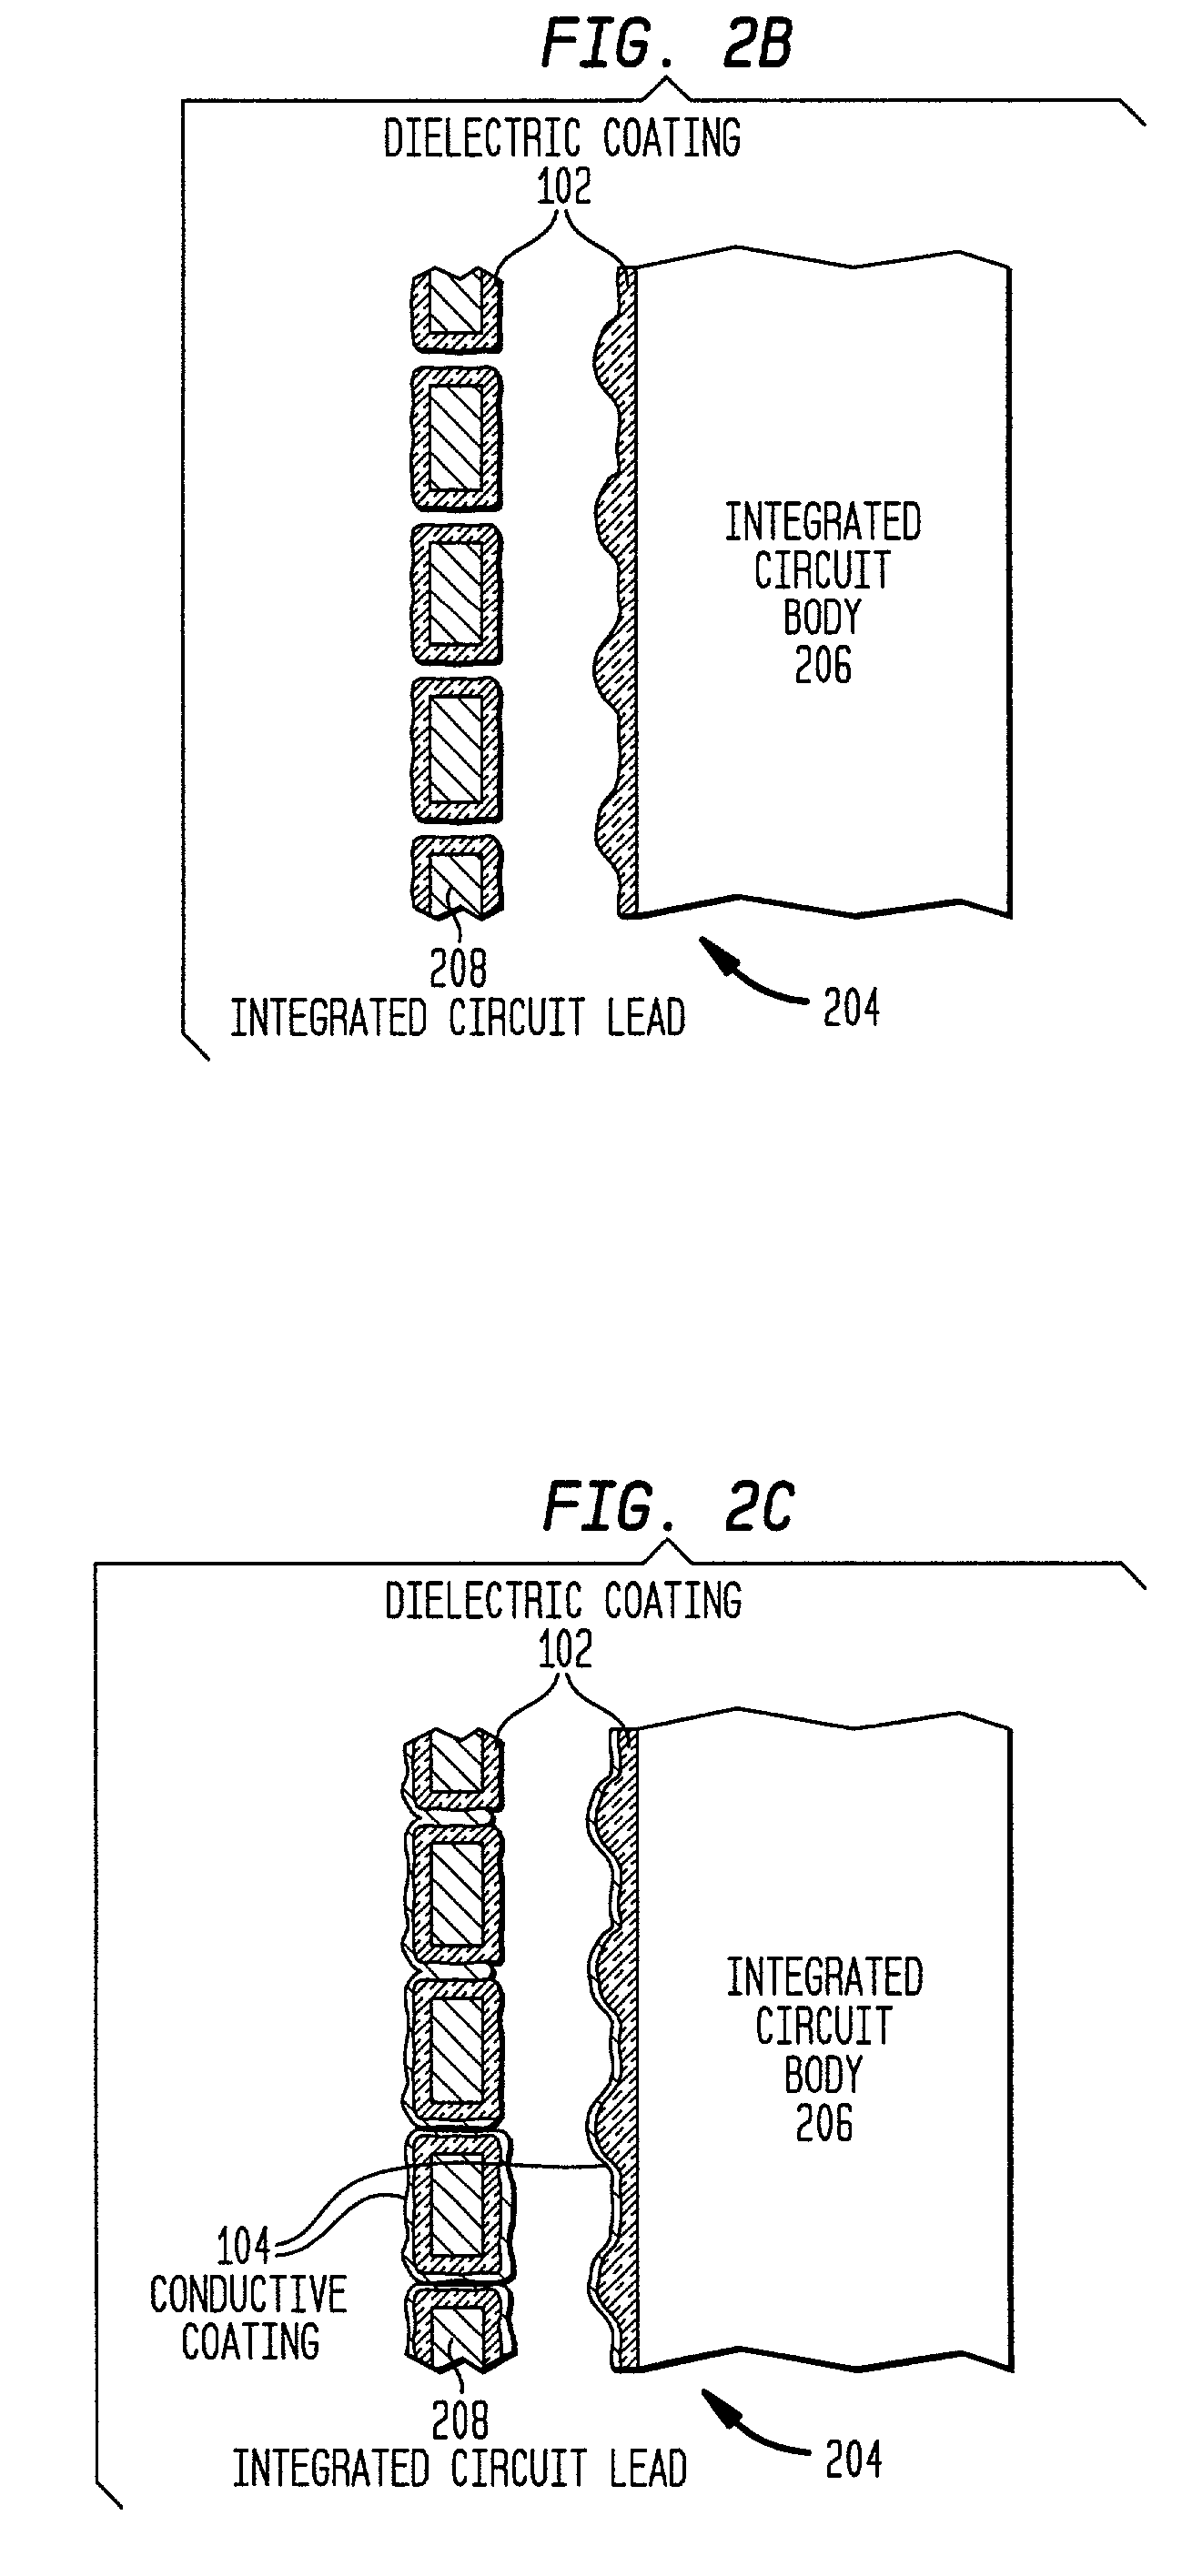 Board-level conformal EMI shield having an electrically-conductive polymer coating over a thermally-conductive dielectric coating